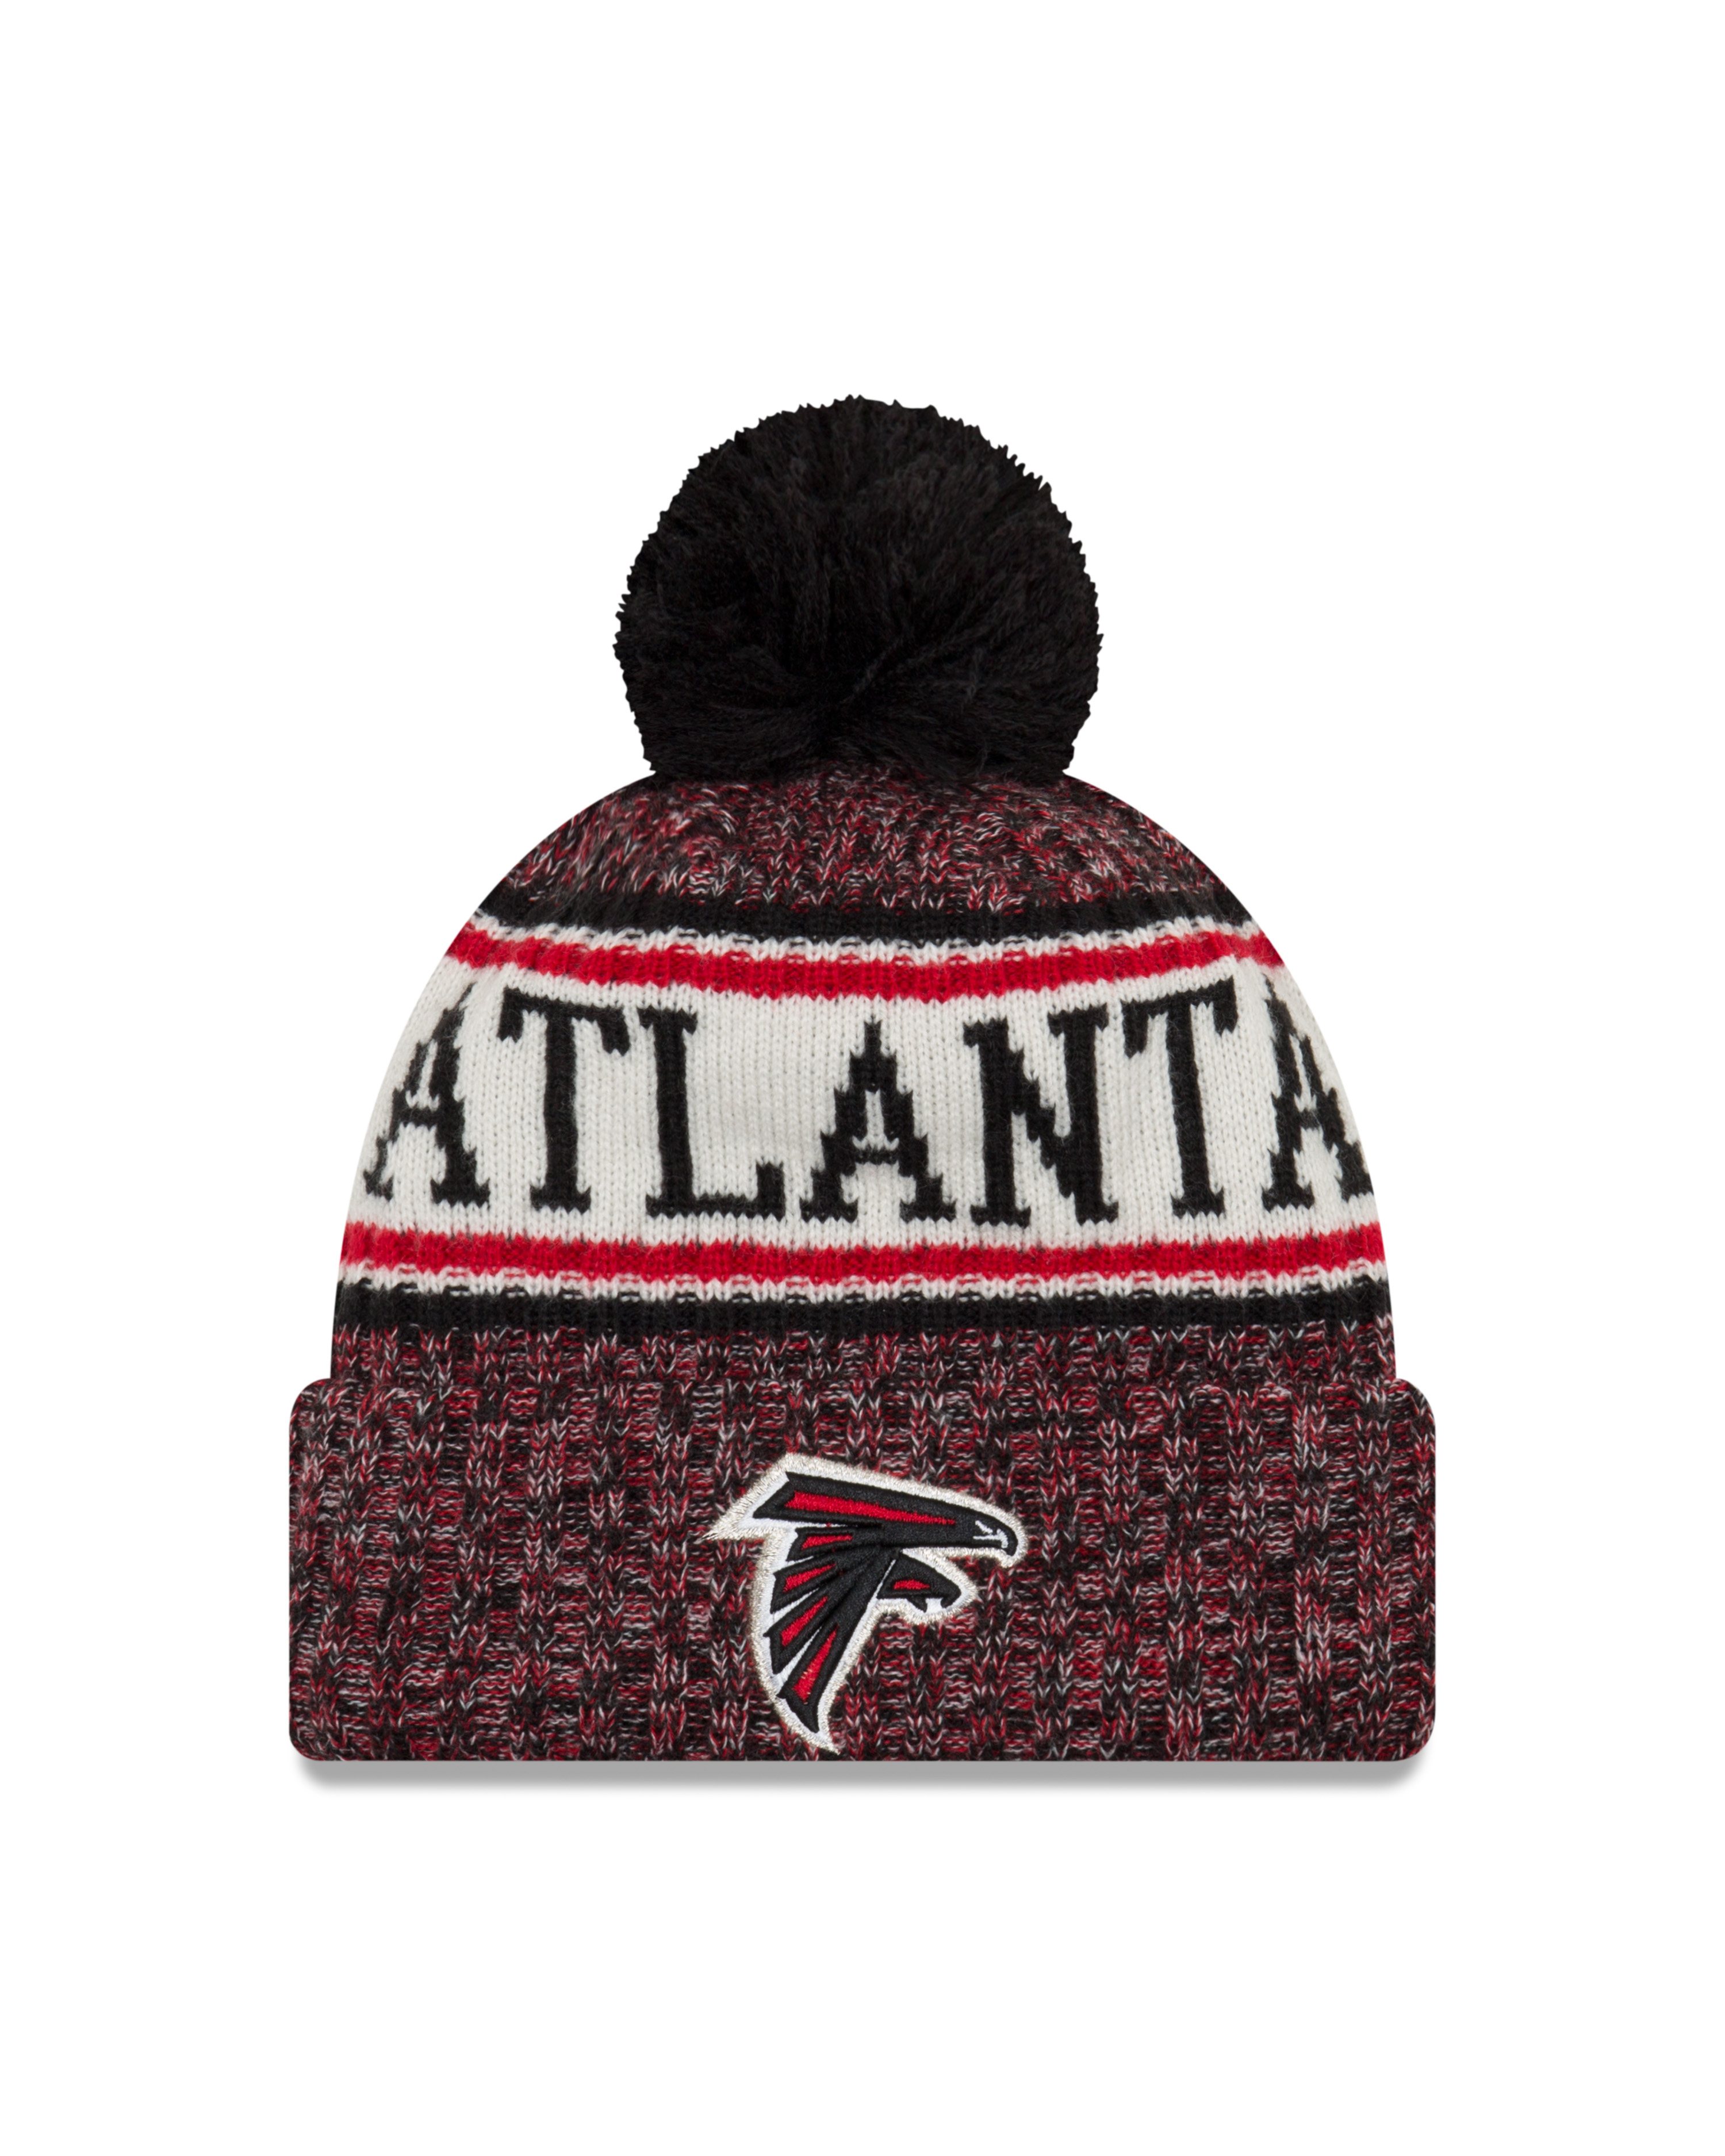 New Era Official NFL Cold Weather Collection #62